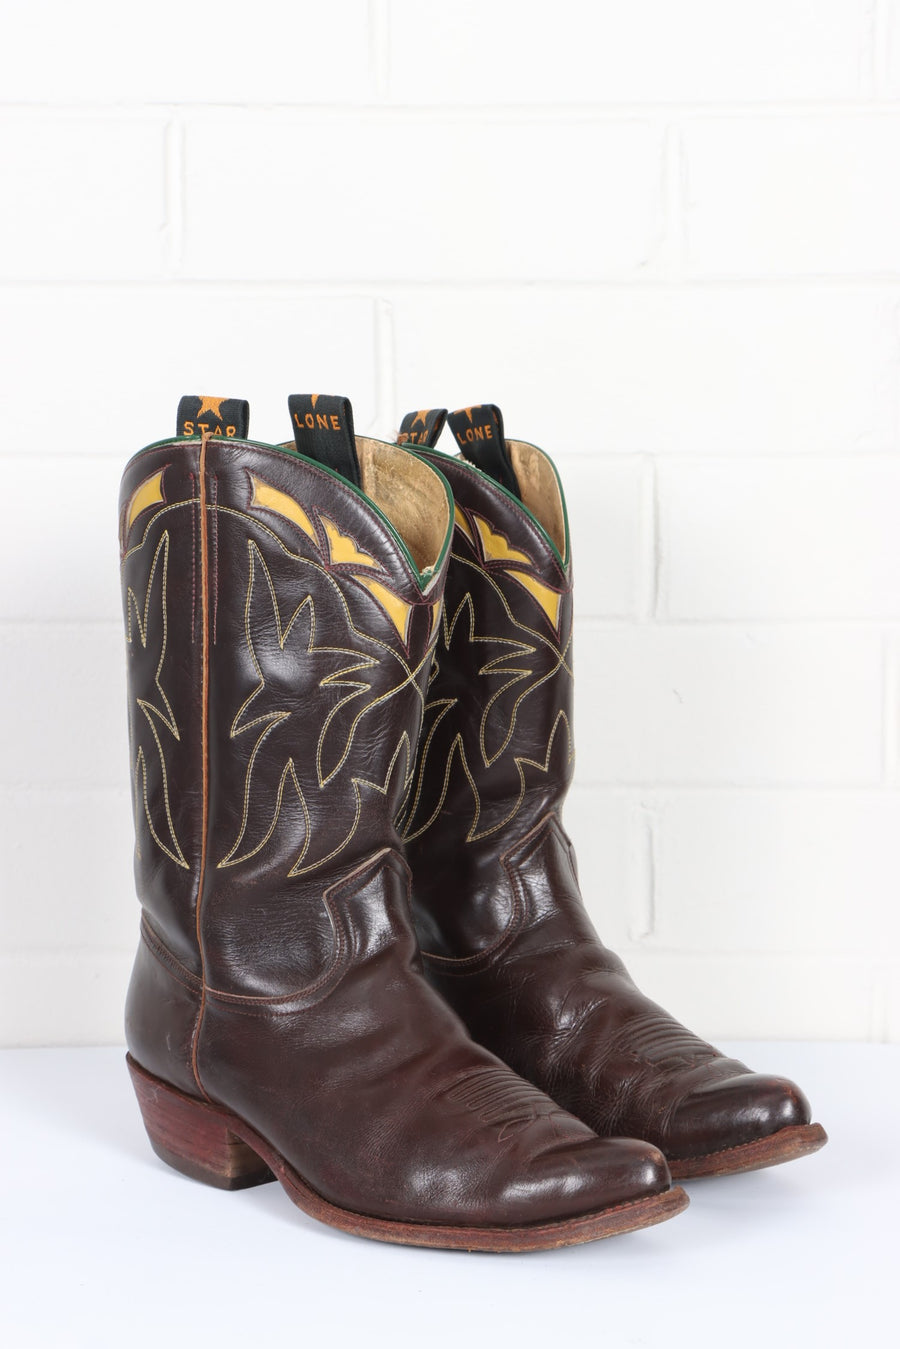 Vintage 'Lone Star' Brown Mahogany Leather Cowboy Boots (9)